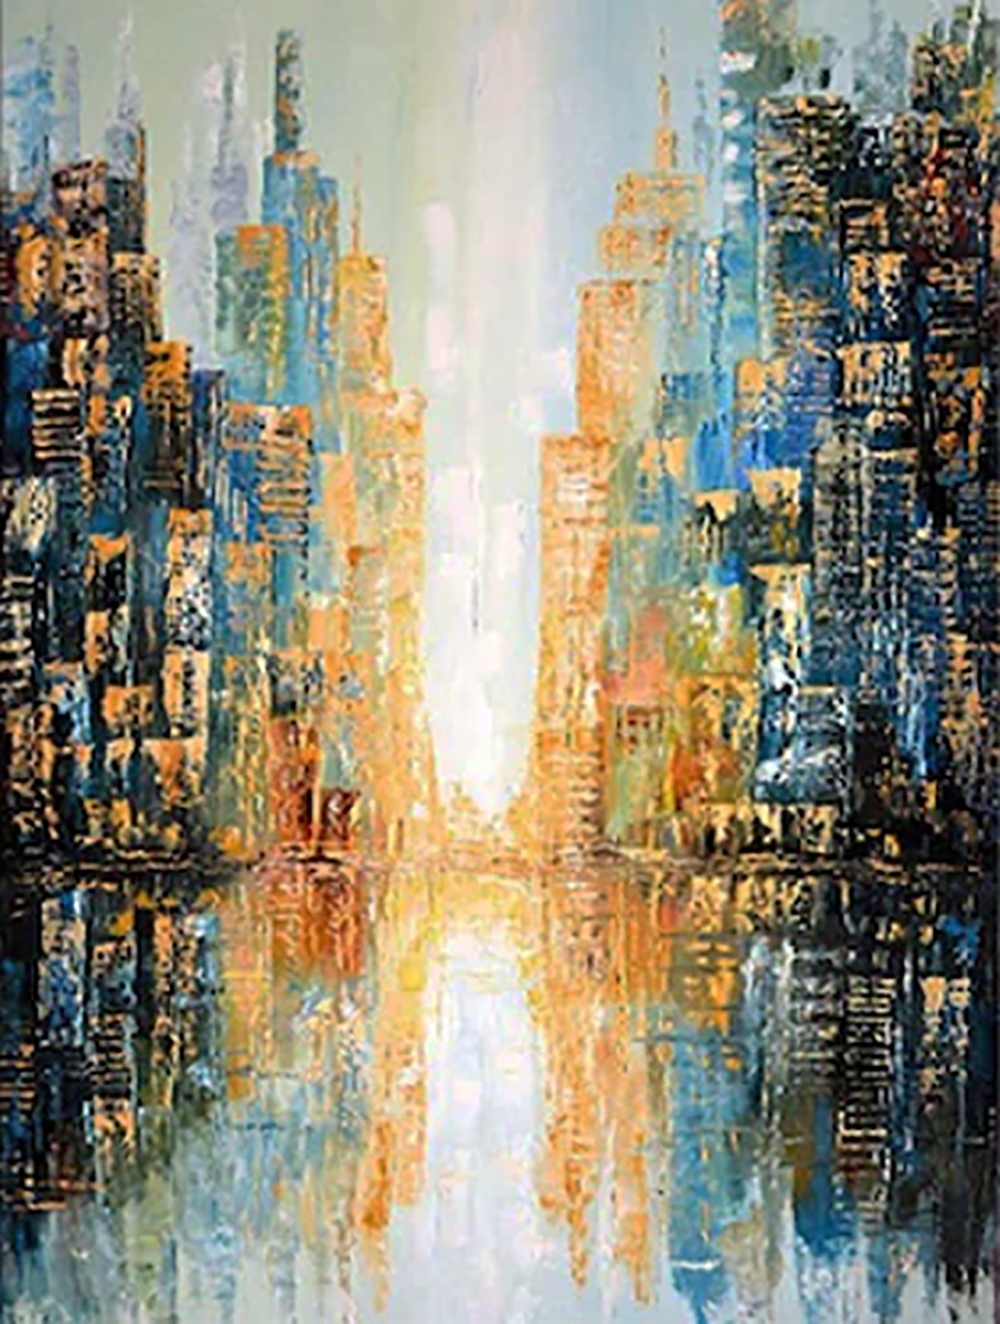 New York painting on canvas NYC0003